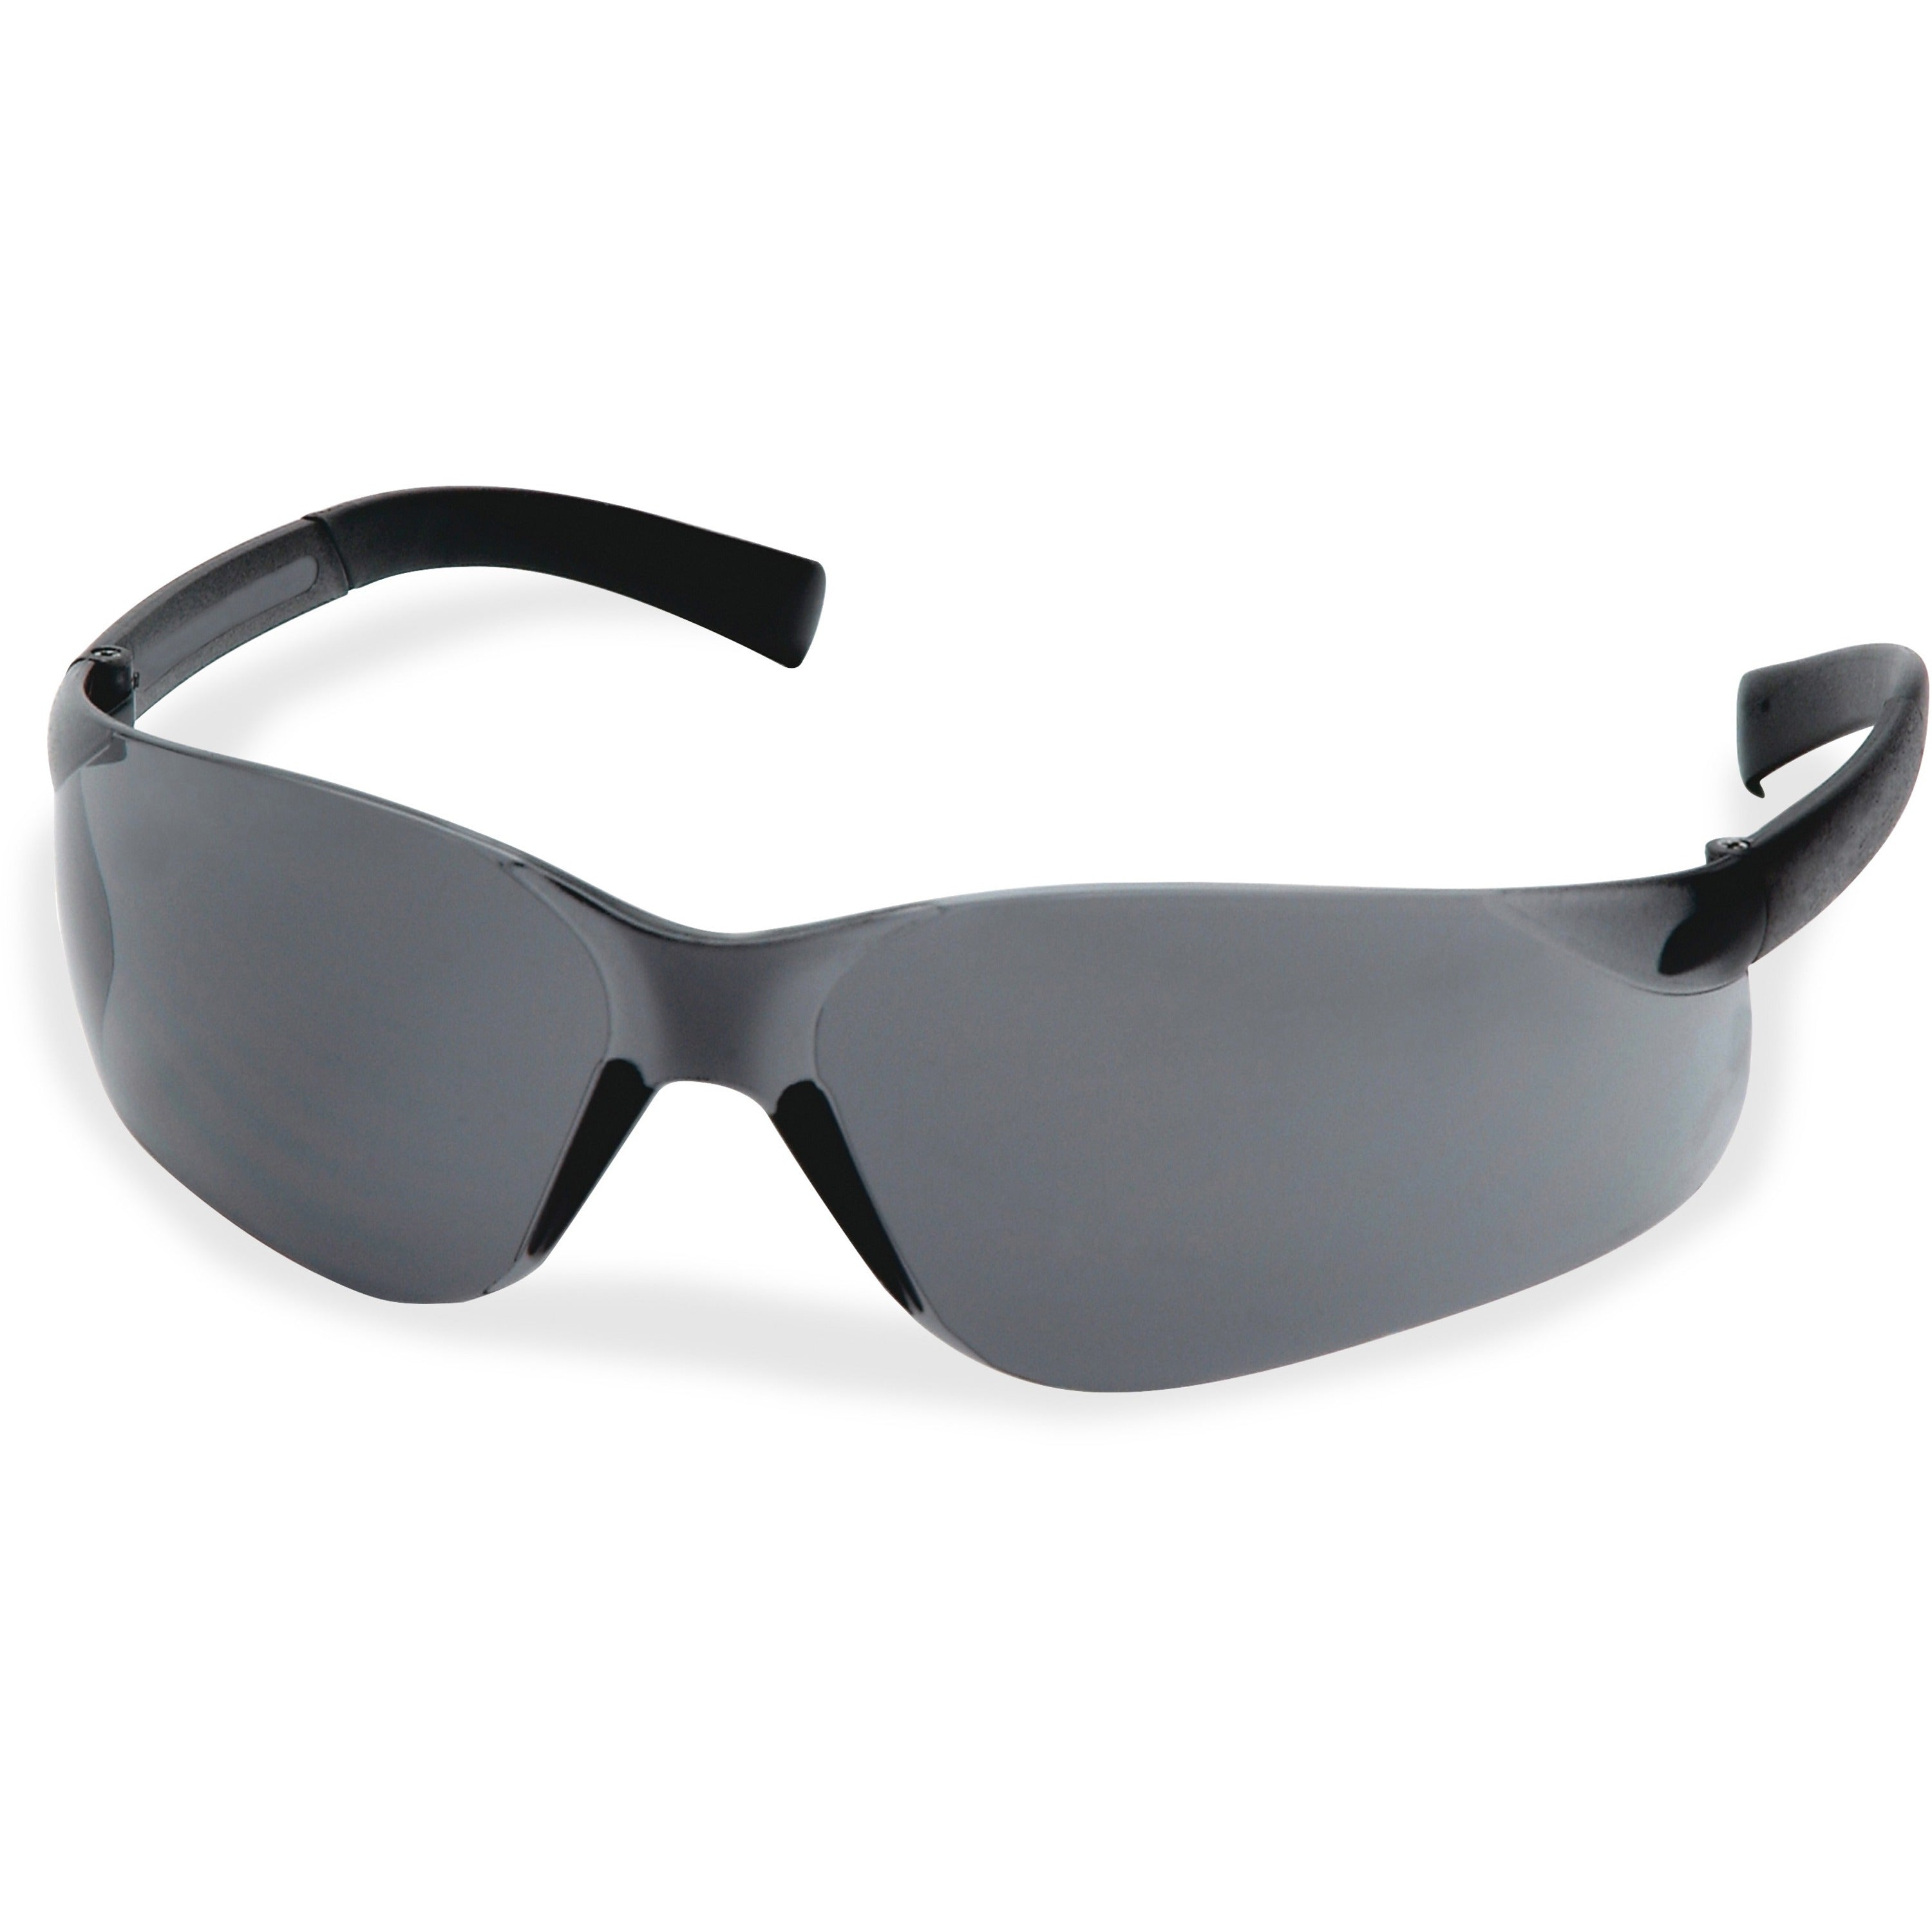 proguard-fit-821-safety-glasses-w-rubber-temple-tips_pgd8212001ct - 1